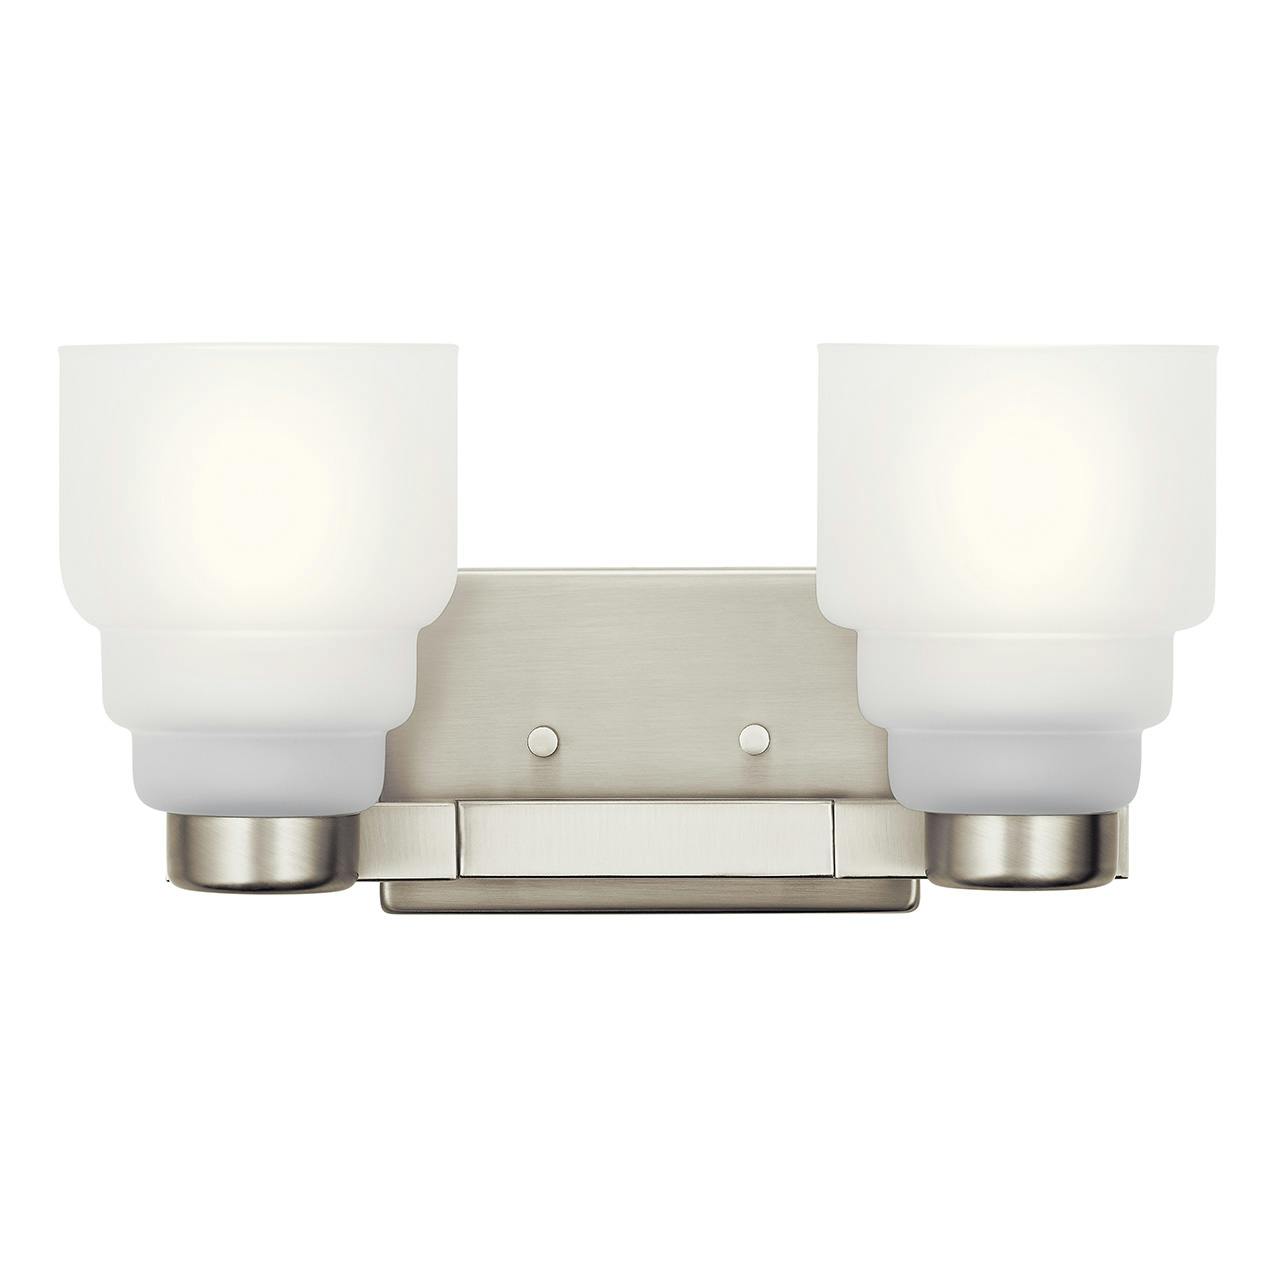 The Vionnet 2 Light Vanity Light Nickel facing up on a white background